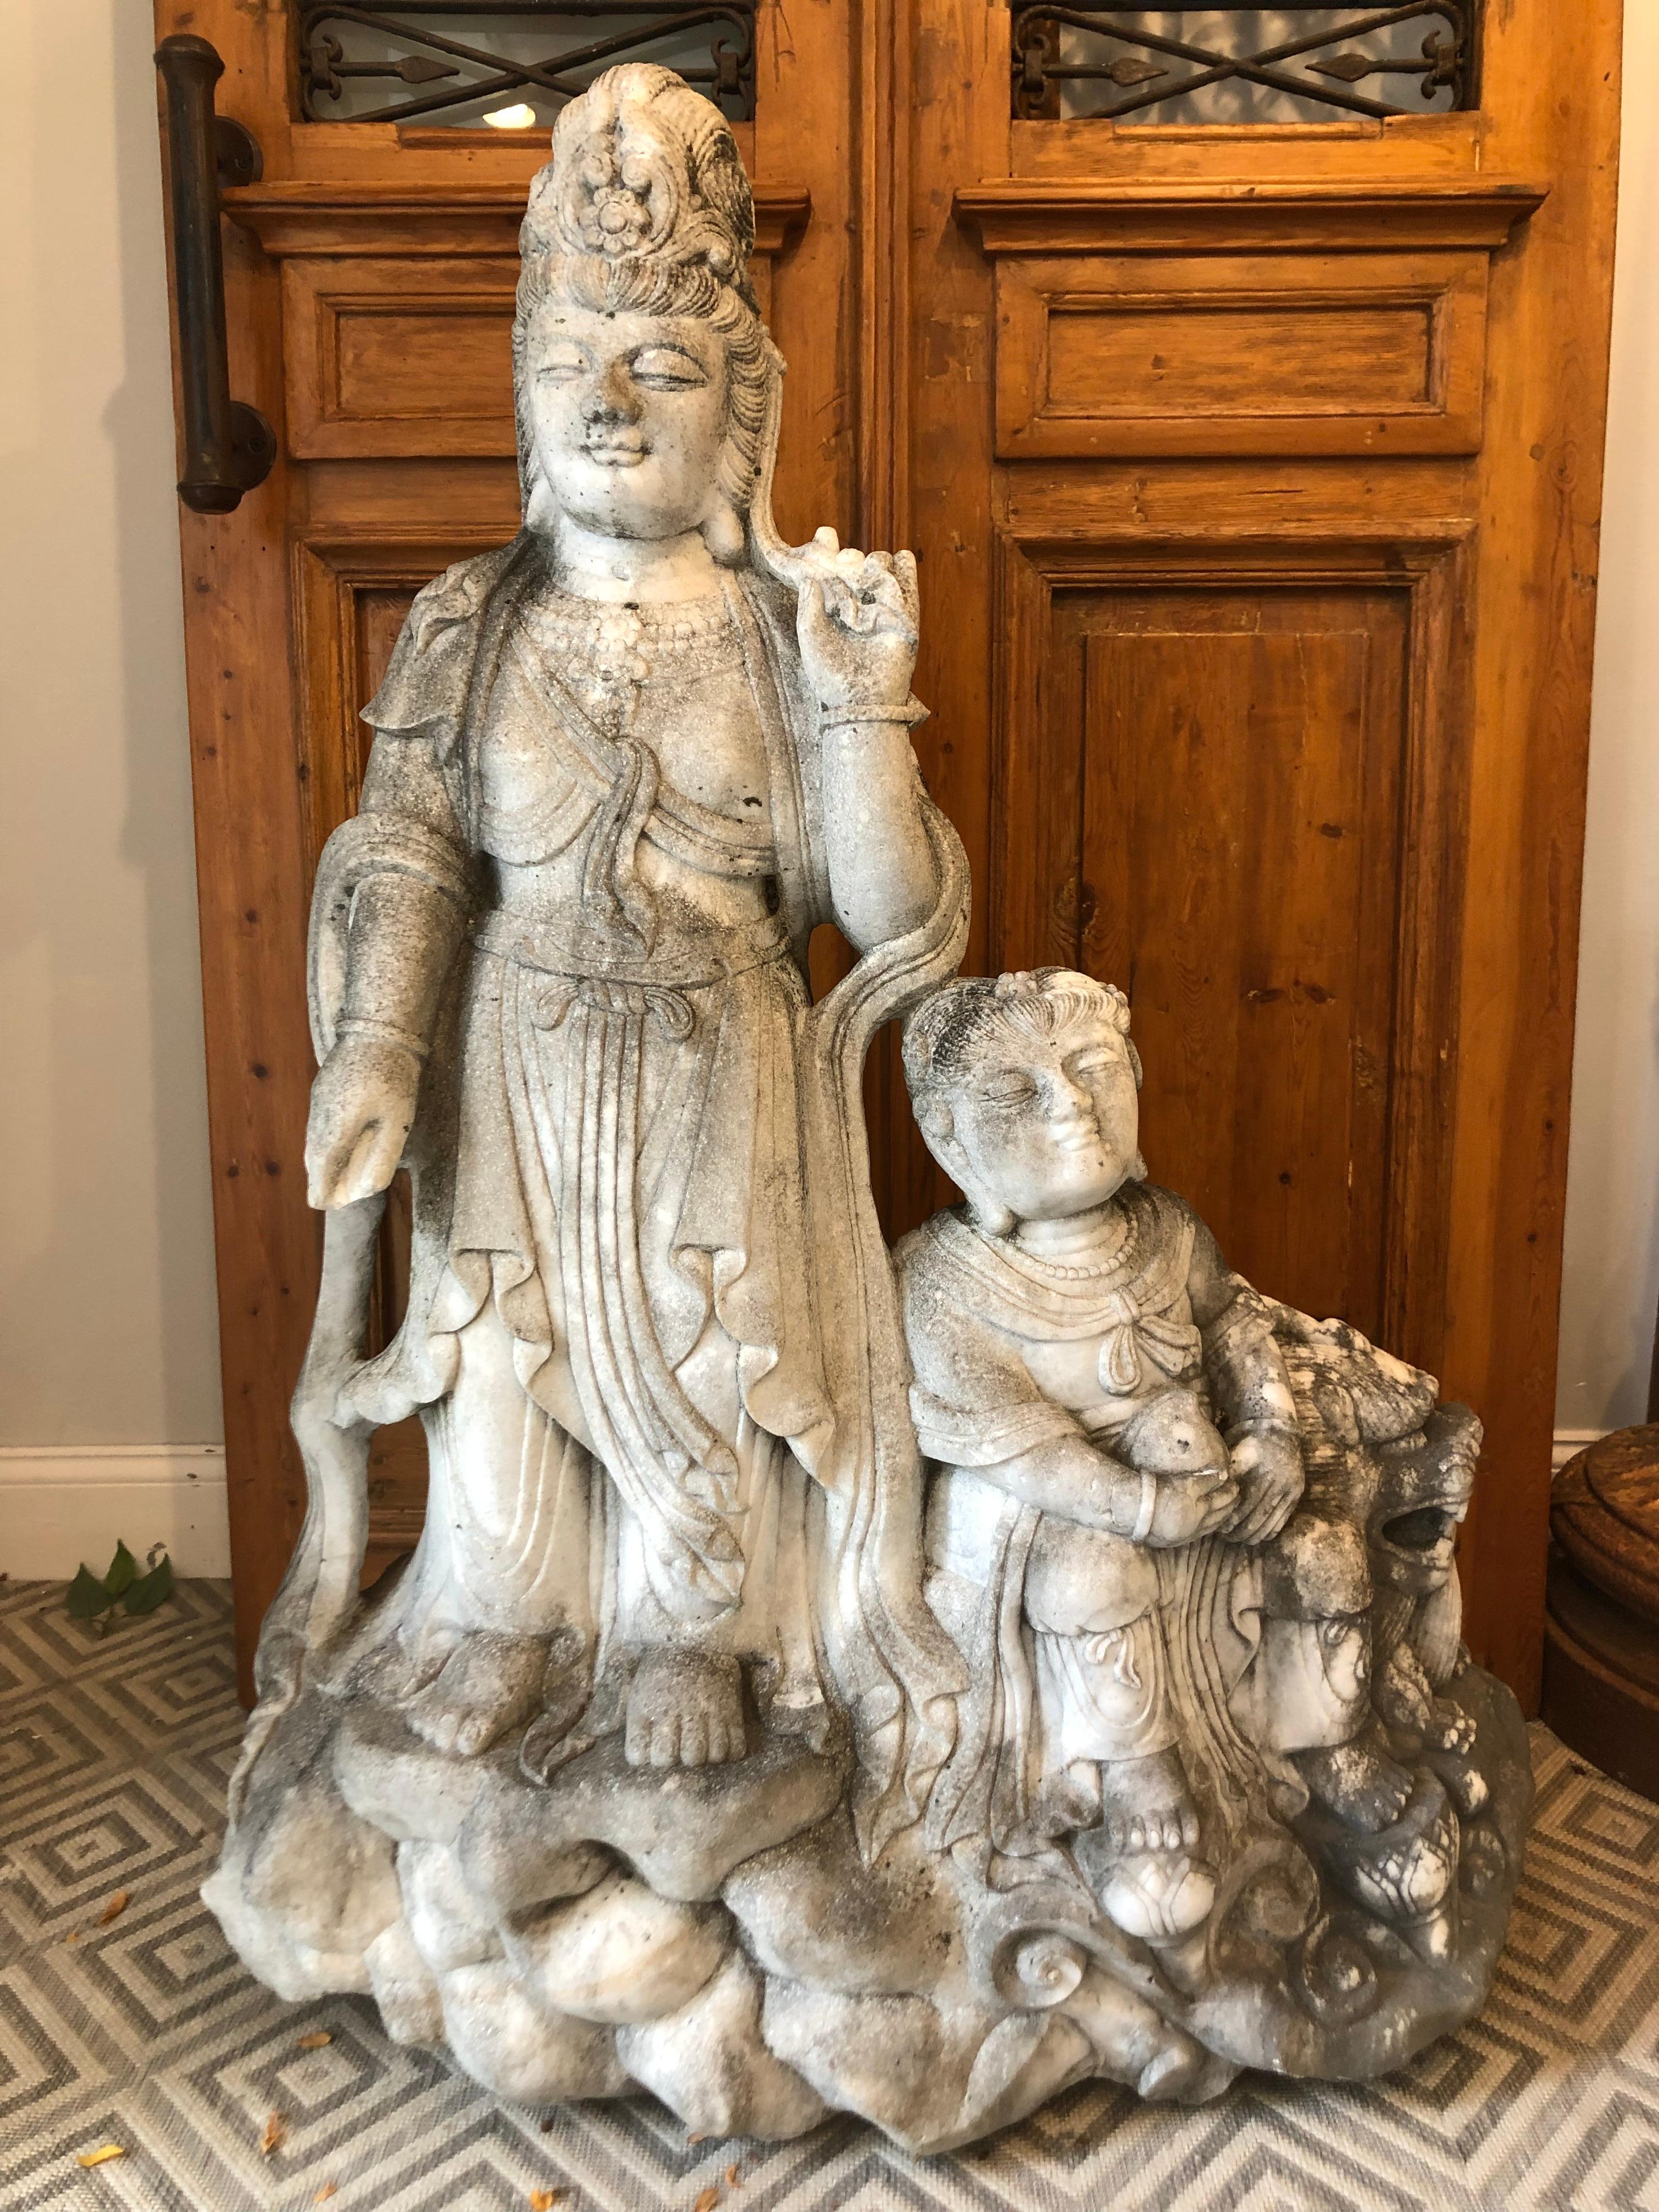 Carved Marble Kwan-Yin Statue with child and foo dog ca 1977 from main land China. Hard to find a Kwan-Yin statue with both child and foo dog its a fantastic piece. This statue would look great in any garden or near any pool a perfect focal point.